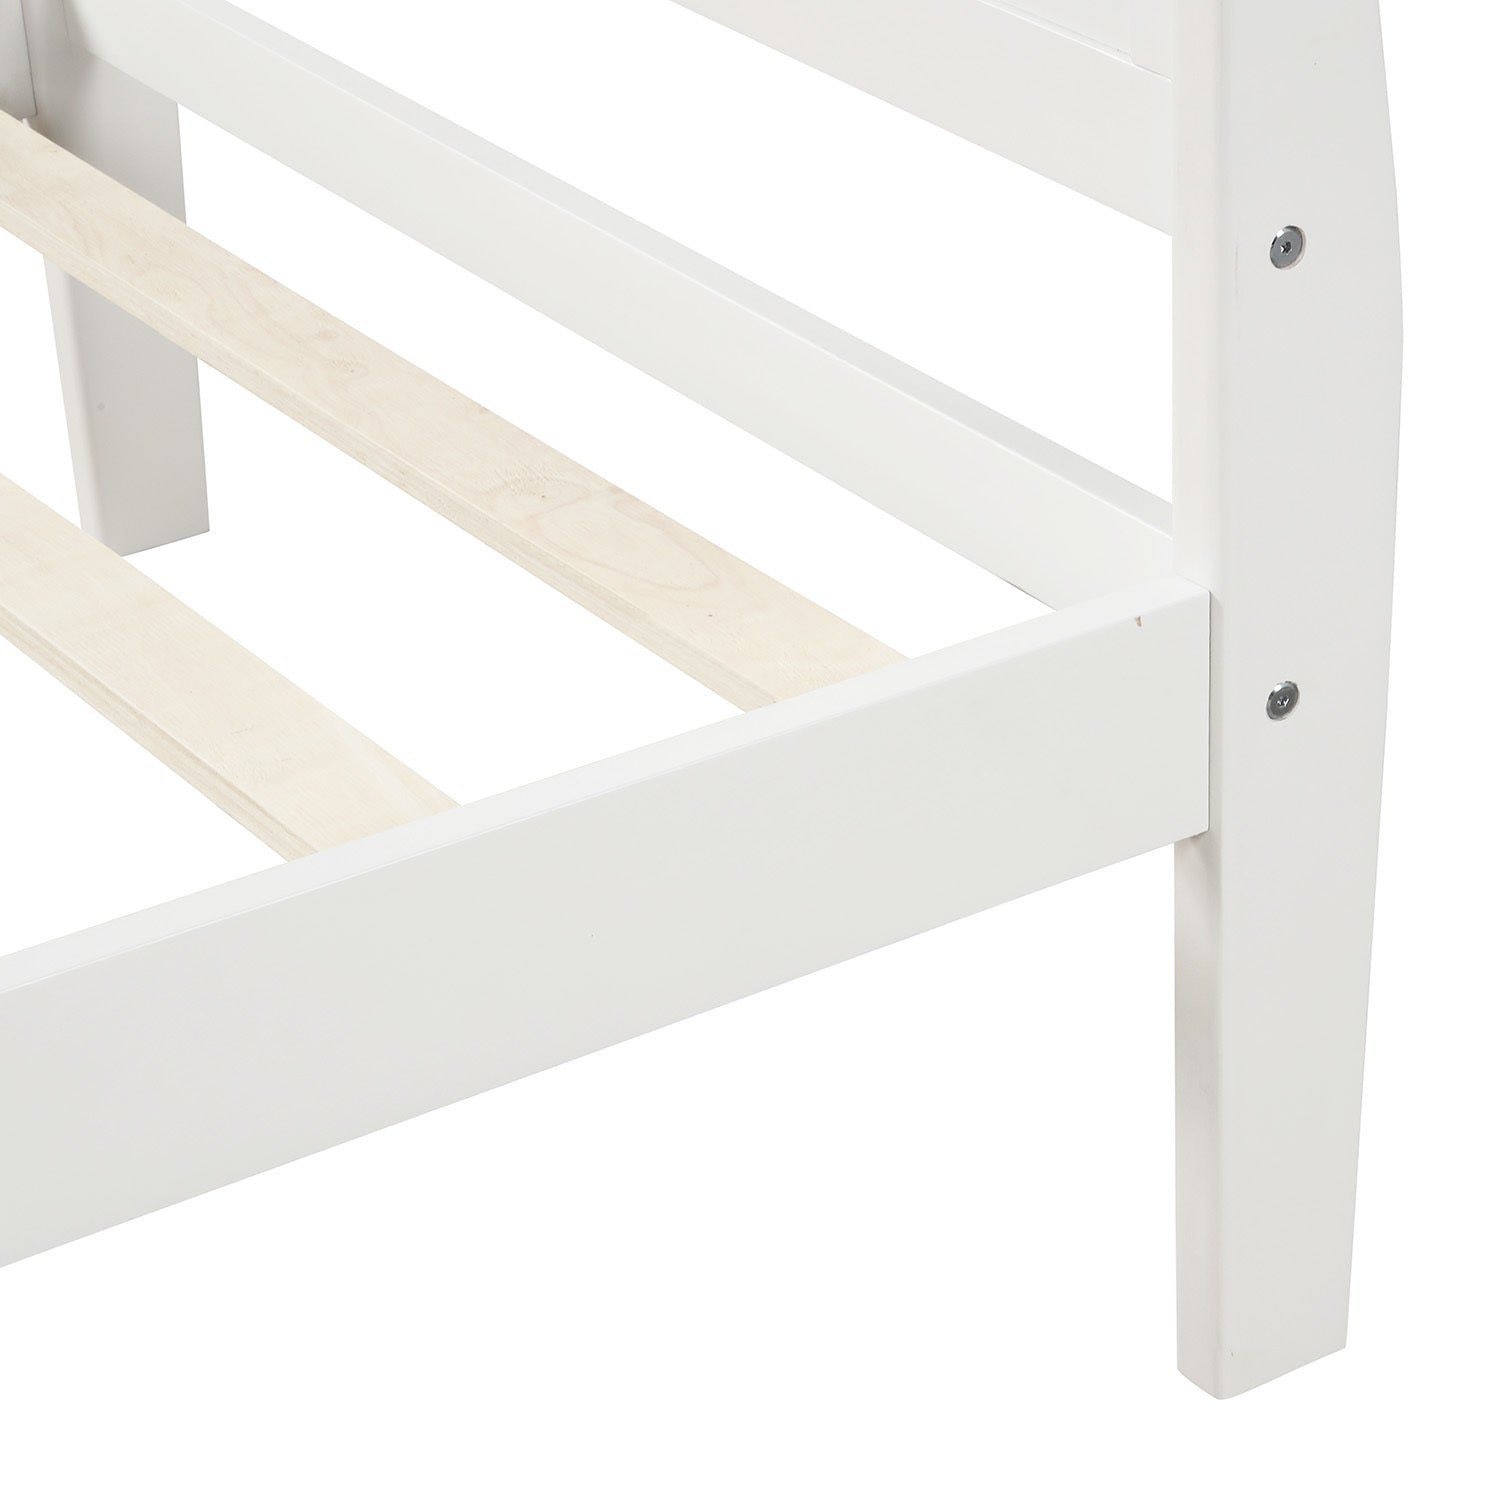 Wood Platform Twin Bed Frame - Sleigh Design with Headboard/Footboard - Mattress Foundation with Wood Slat Support